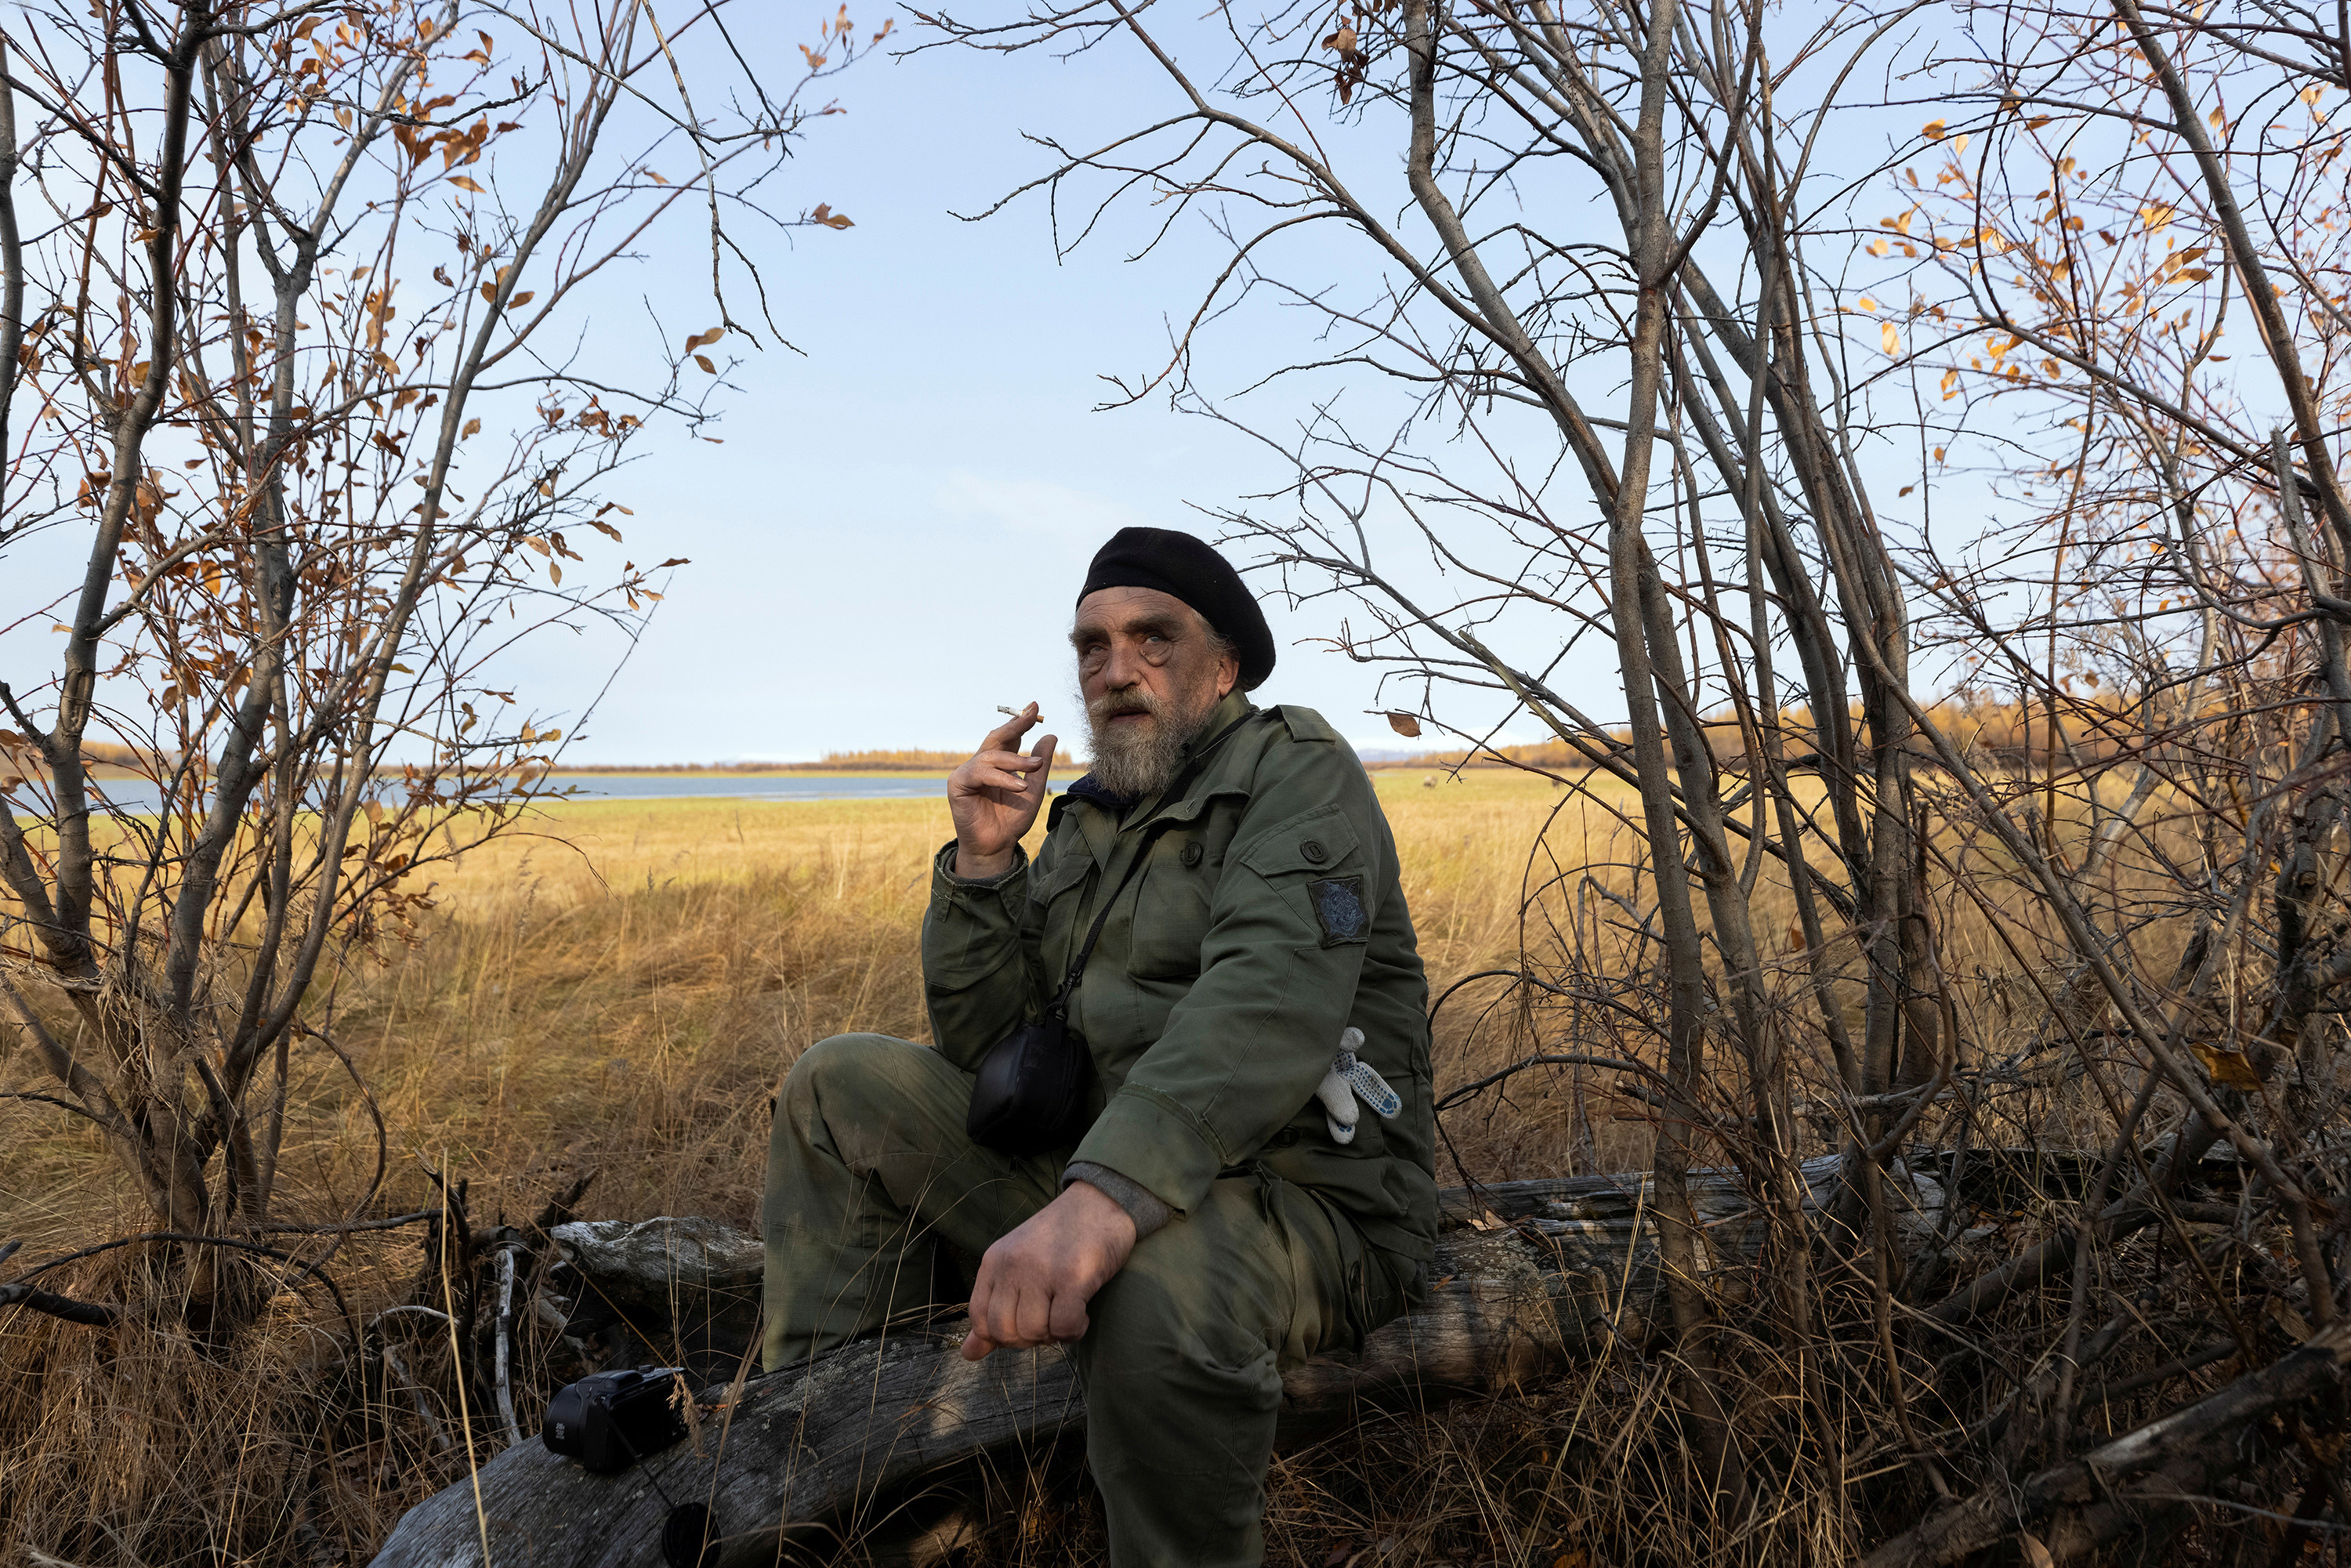 A man in an olive green jacket and pants sits on a fallen tree and smokes a cigarette